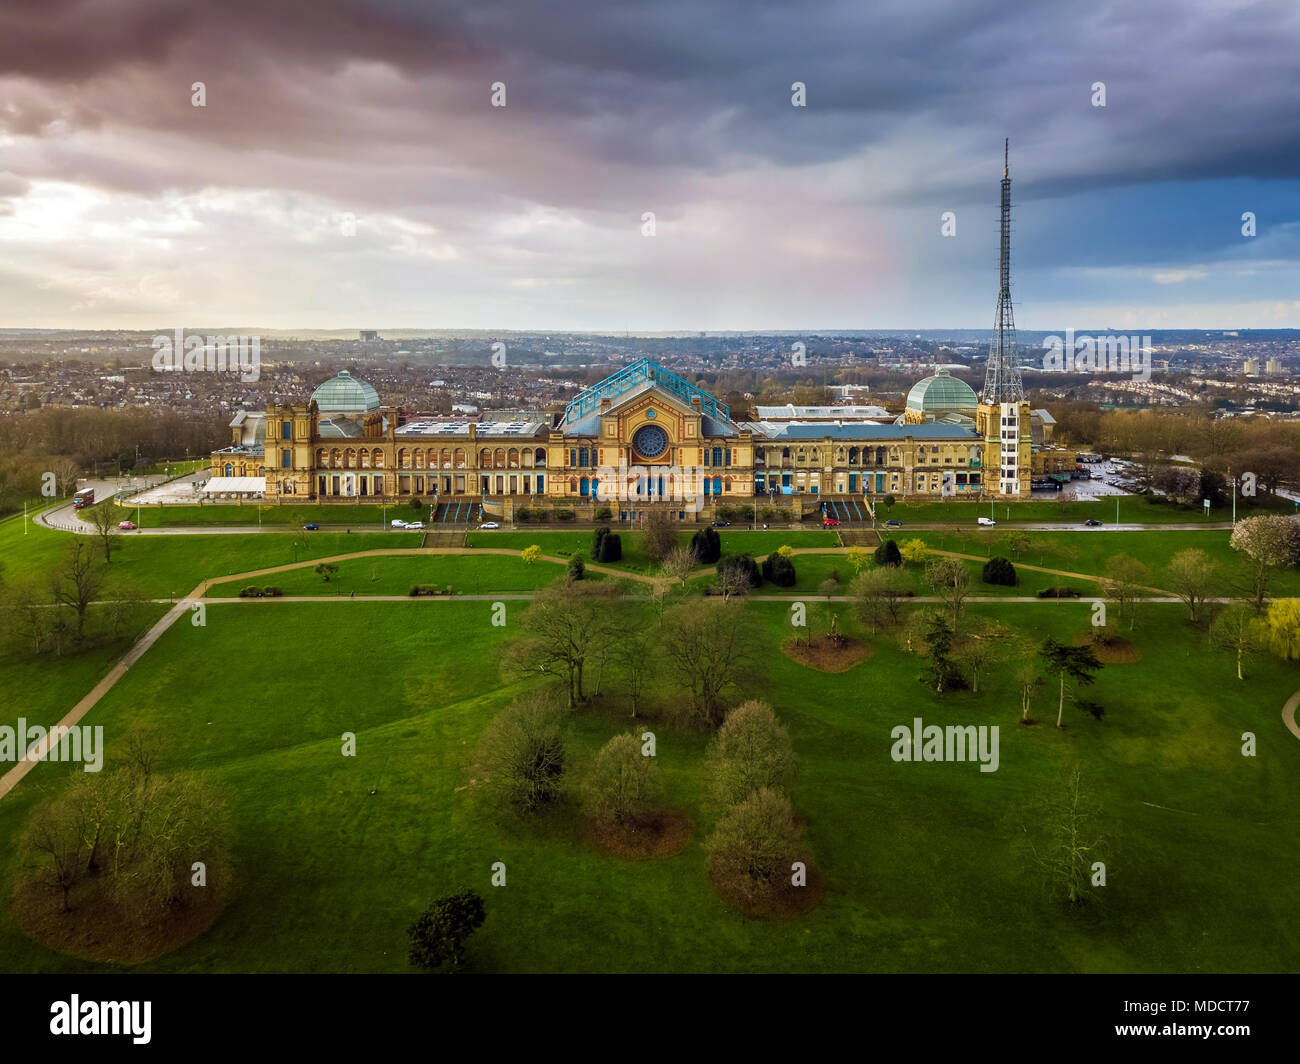 London, England - Aerial panromaic view of Alexandra Palace in Alexandra Park with dramatic clouds behind Stock Photo